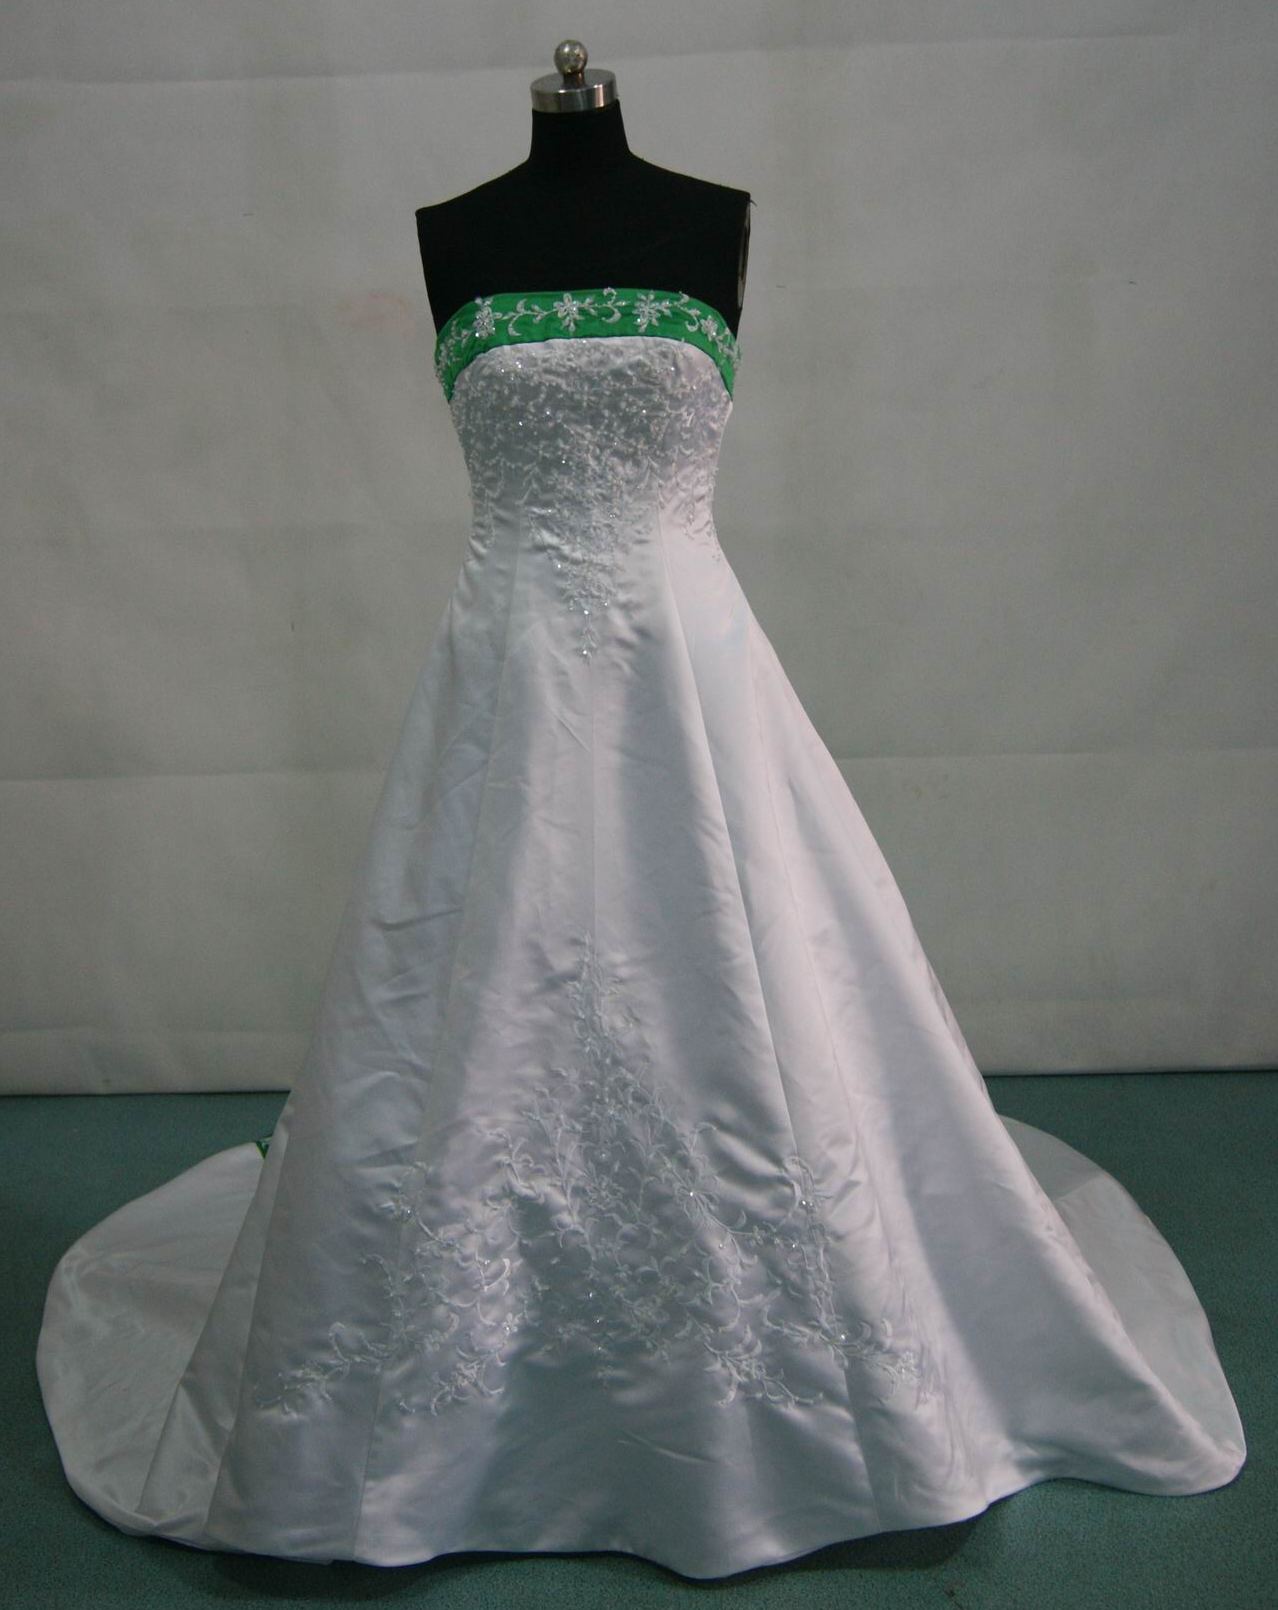 Size 8 Winter wedding gown - white and emerald green